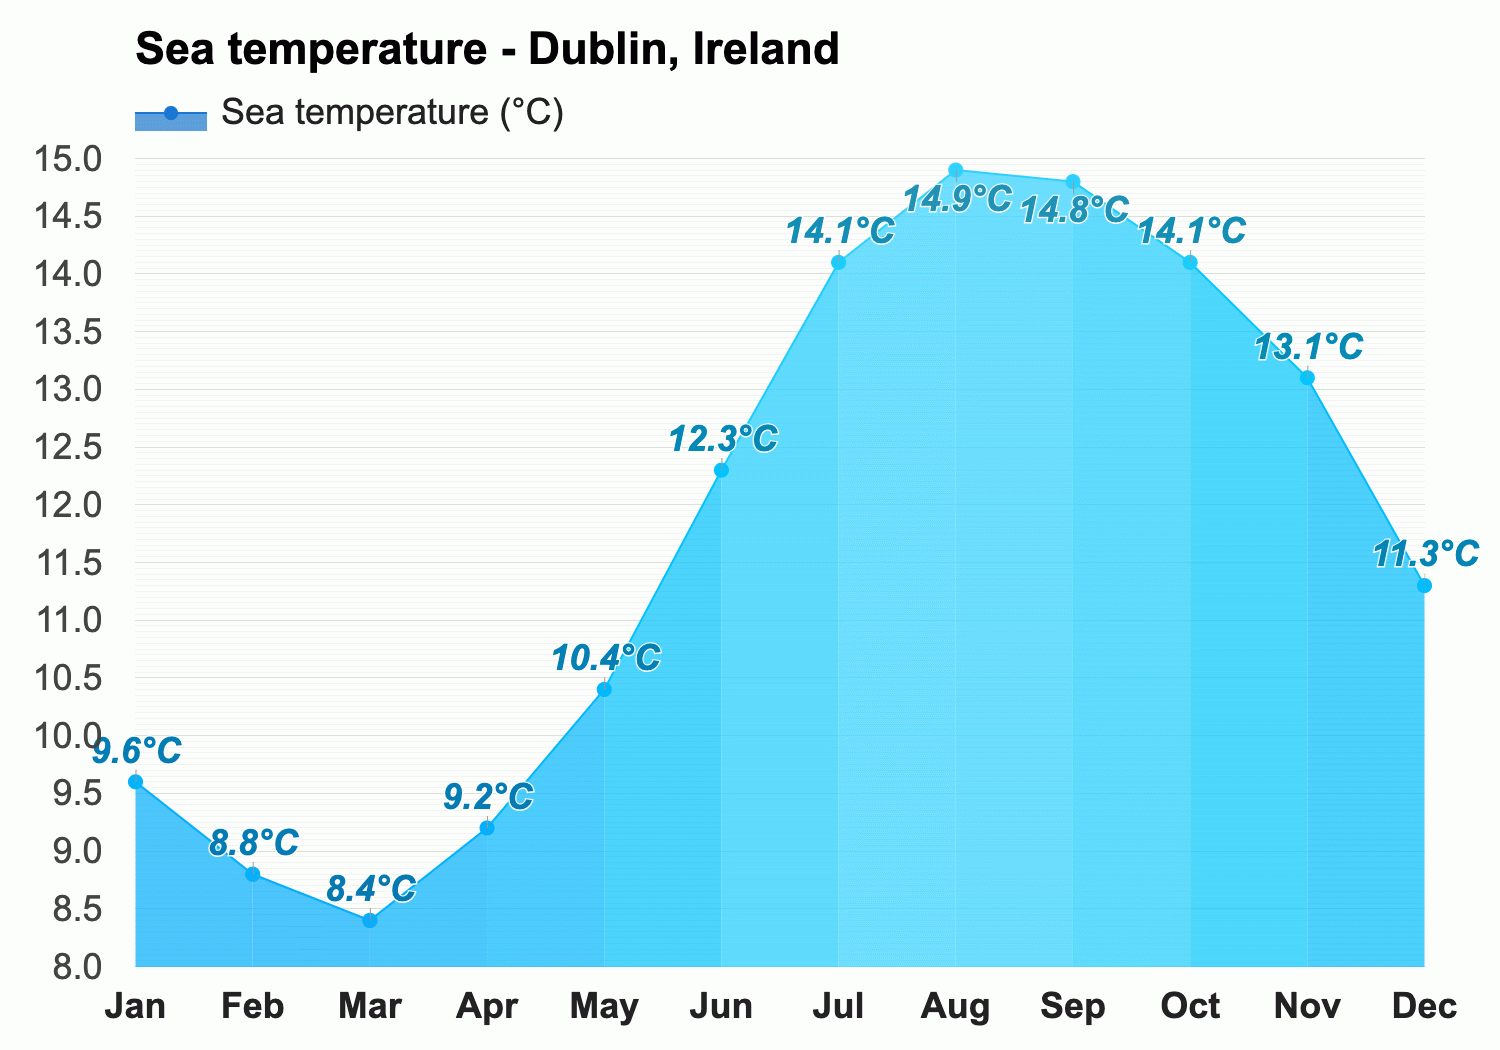 Dublin, Ireland - Climate & Monthly weather forecast